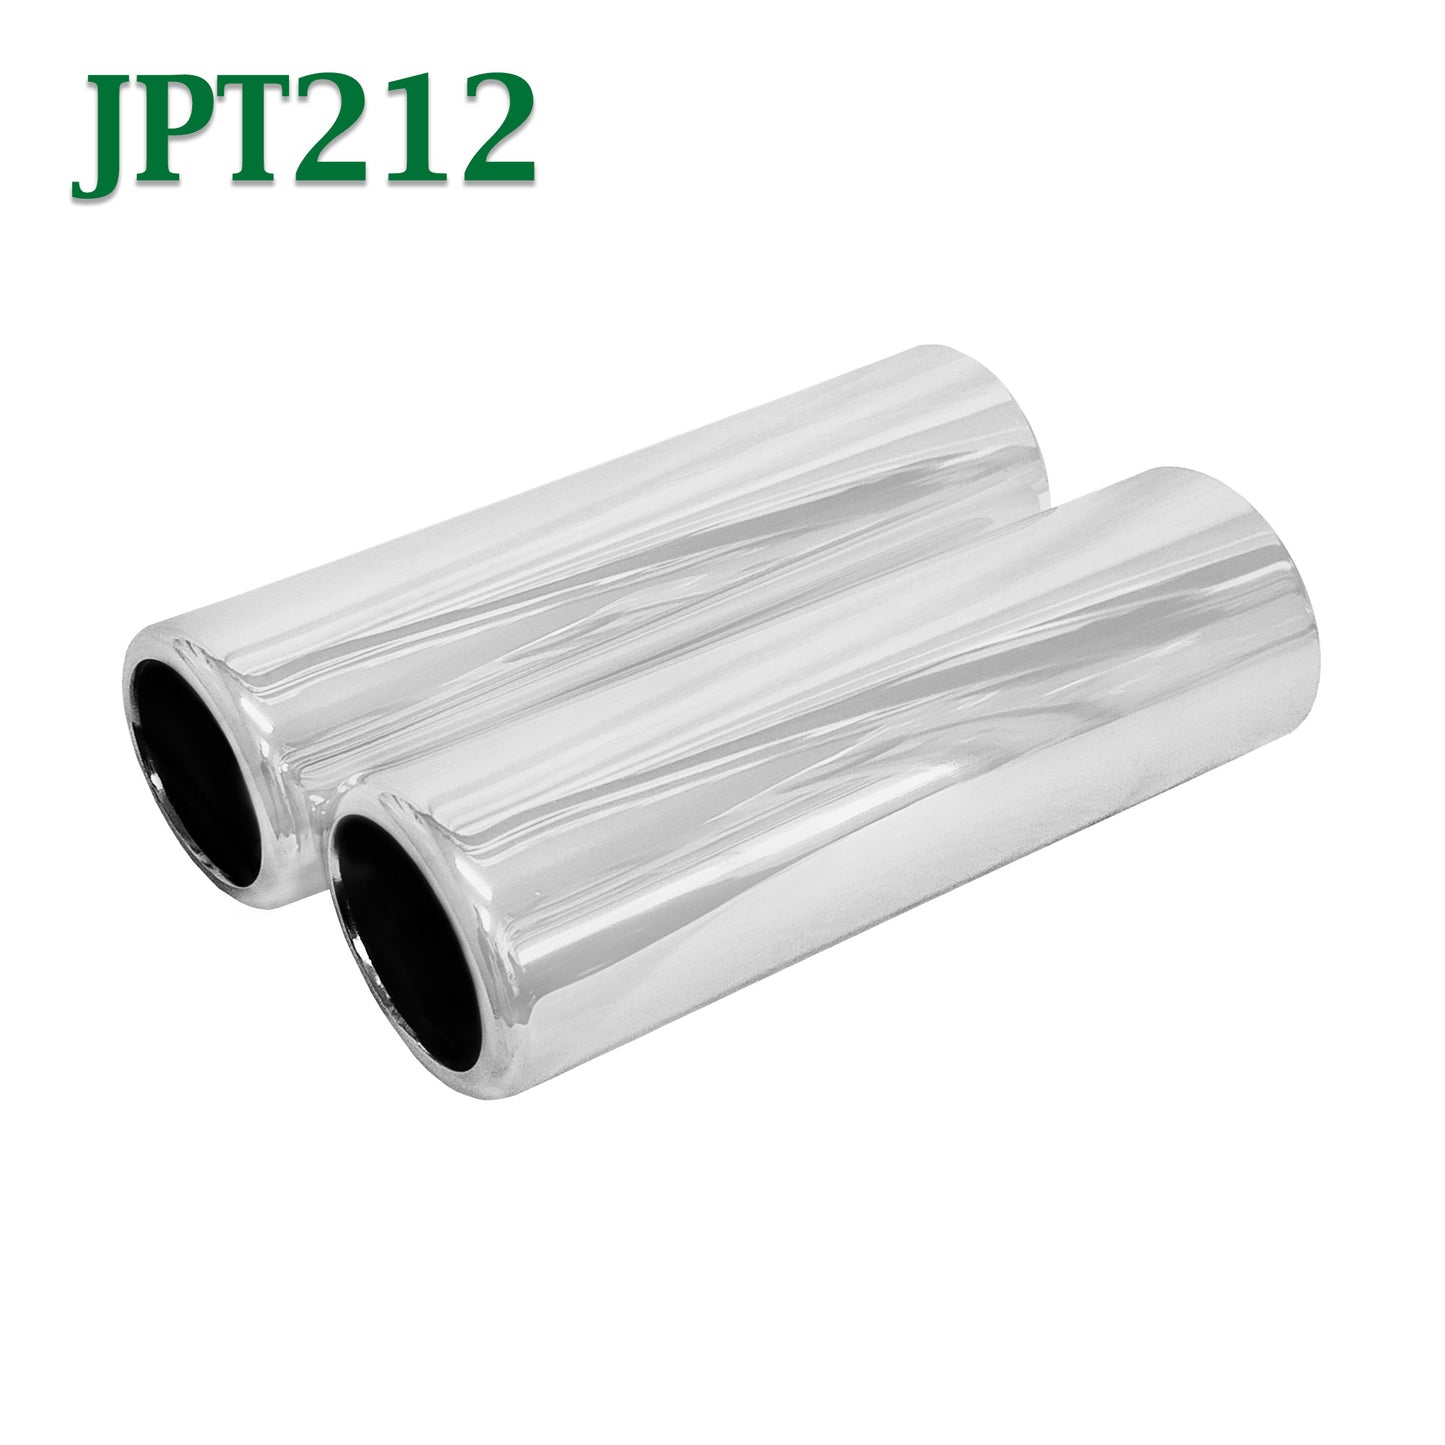 JPT212 2.5" Chrome Round Pencil Exhaust Tip 2 1/2" Inlet 2 3/4" Outlet 9" Long